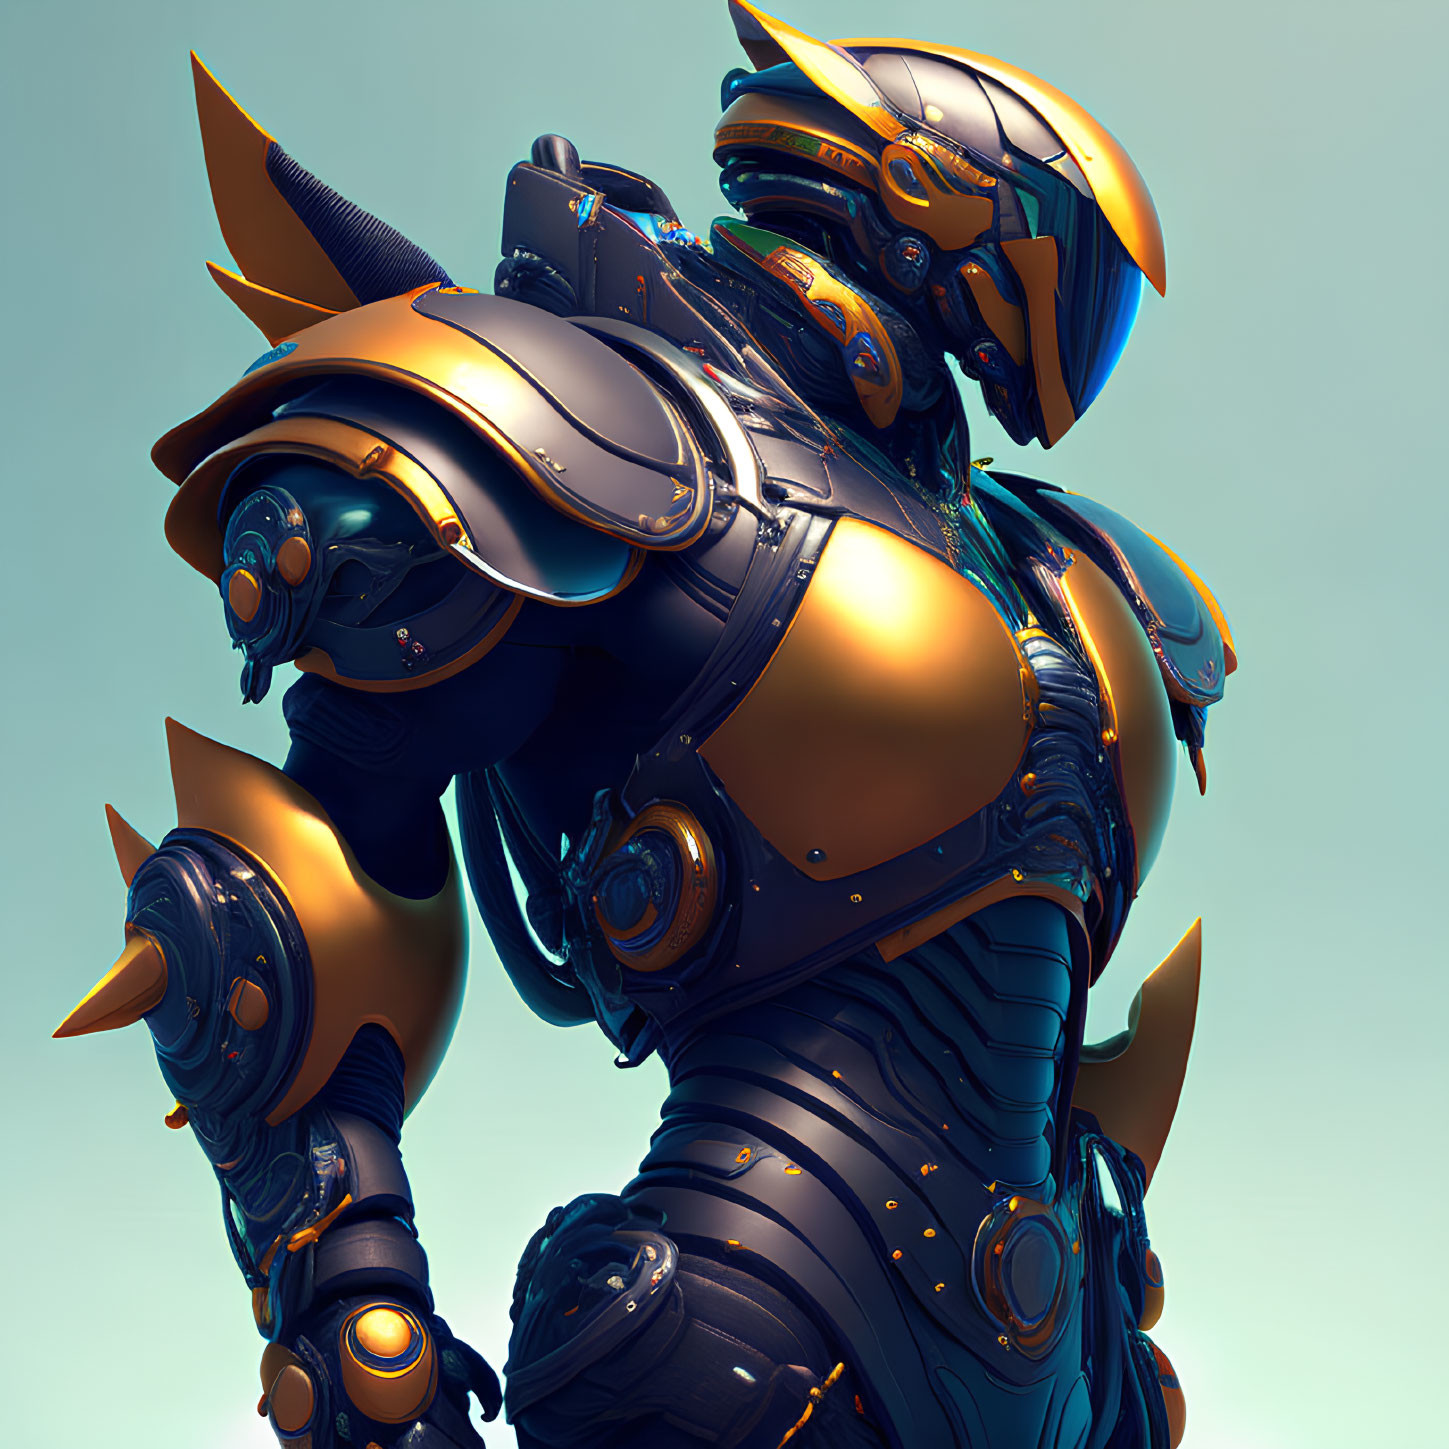 Detailed Futuristic Warrior in Blue and Gold Armor